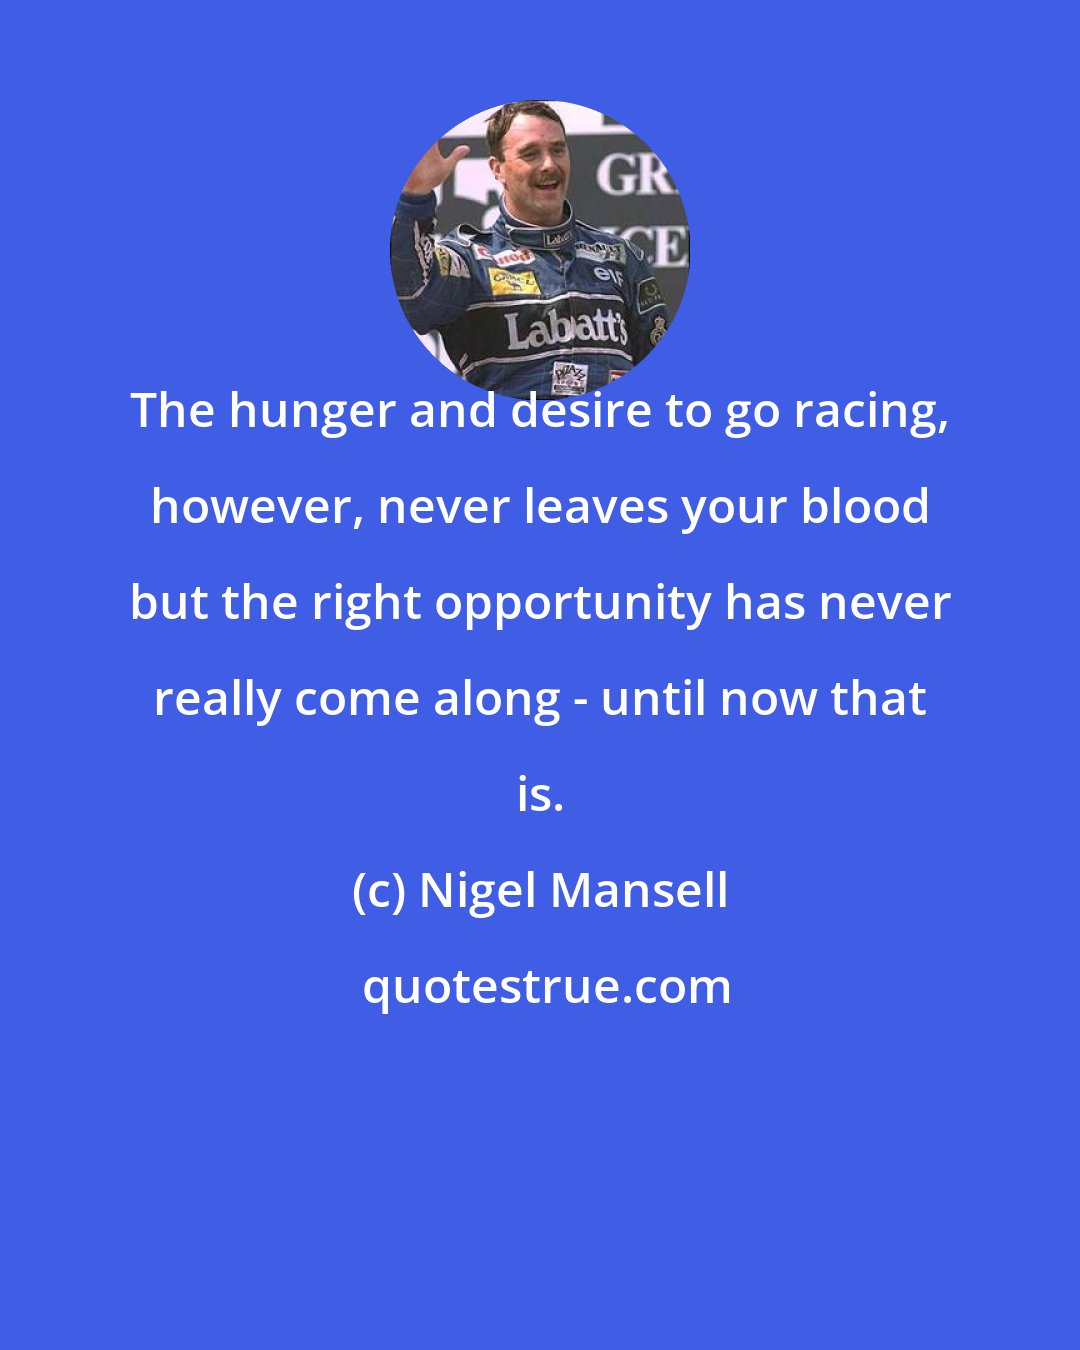 Nigel Mansell: The hunger and desire to go racing, however, never leaves your blood but the right opportunity has never really come along - until now that is.